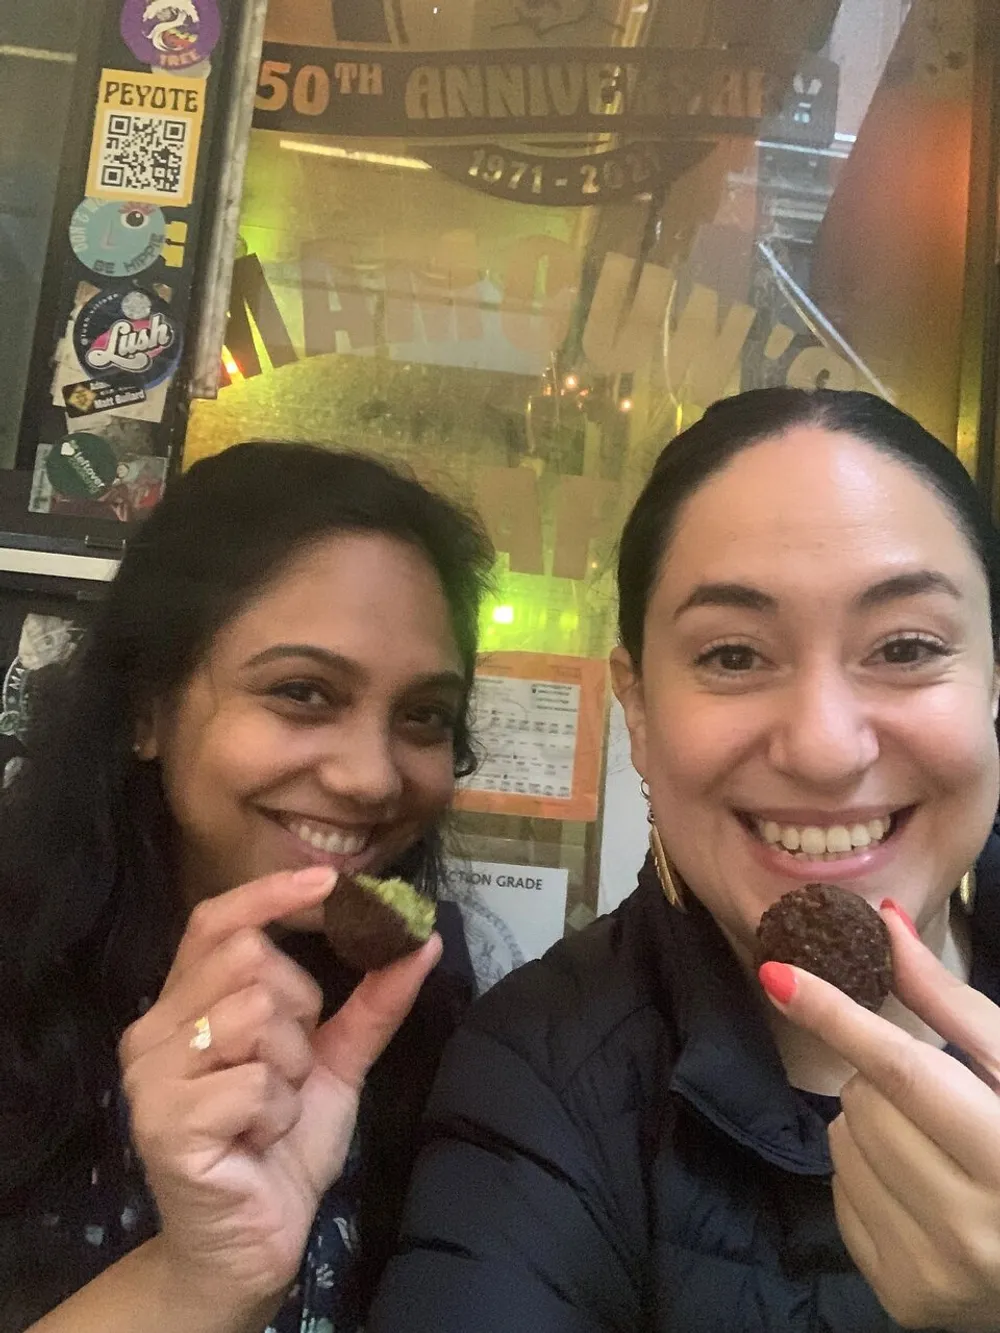 Two individuals are smiling at the camera holding up what appears to be small treats with a window reflecting a neon sign and various stickers in the background